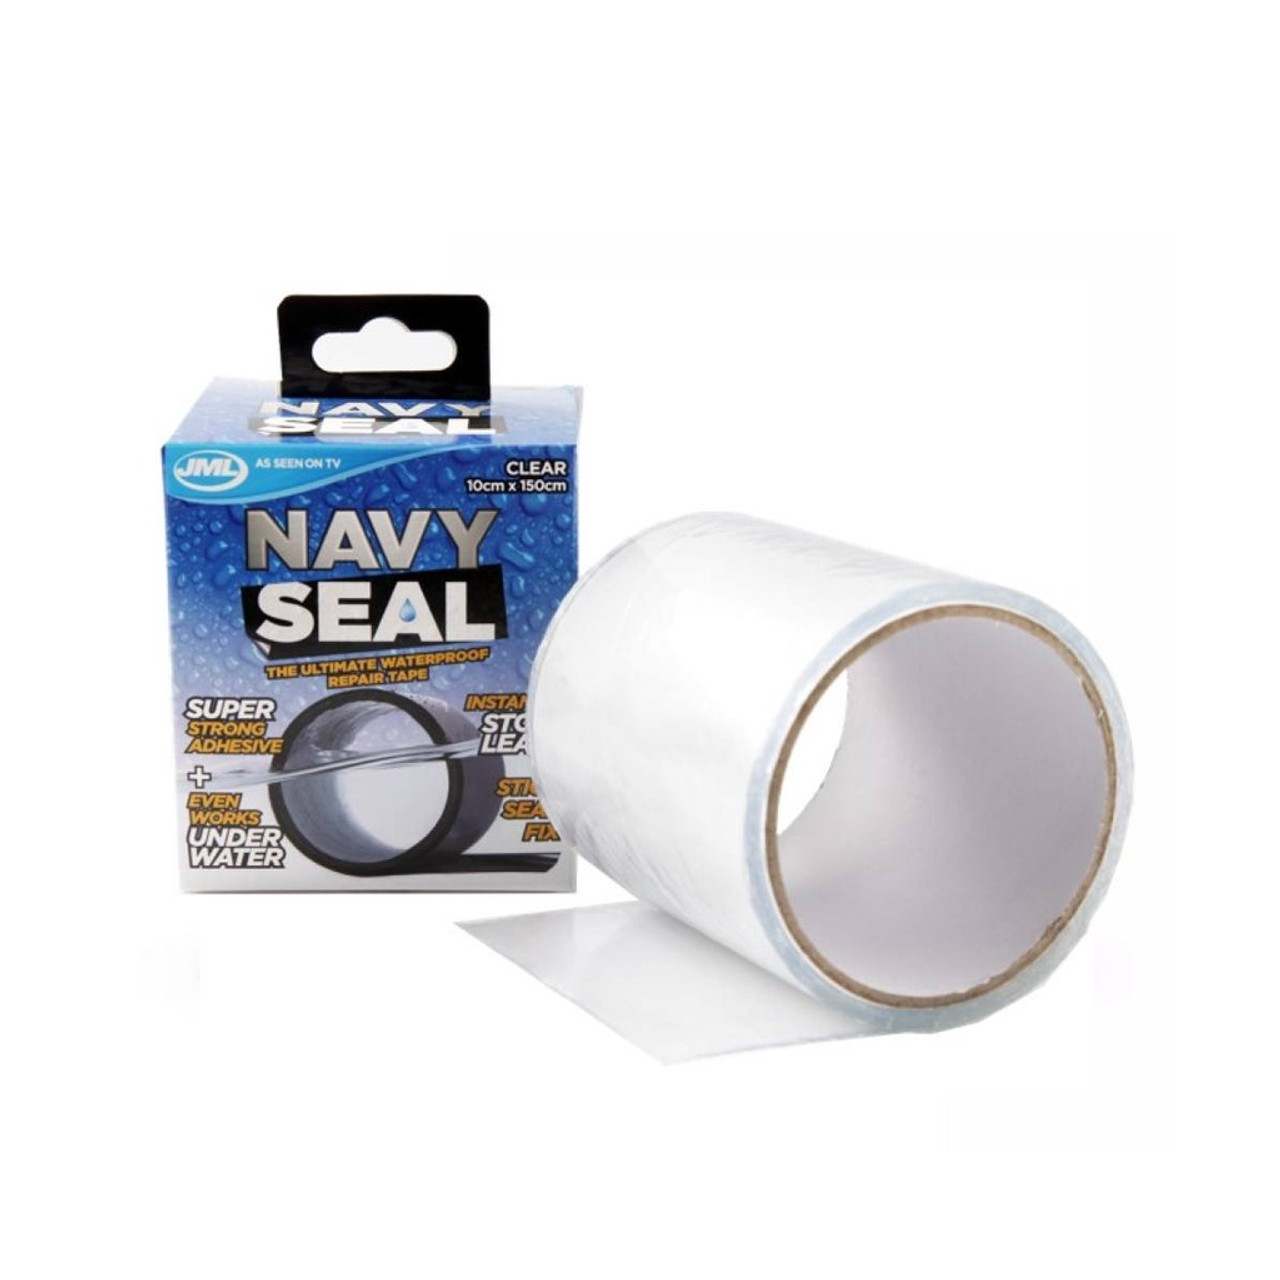 Super Strong, Rubberized, Waterproof Tape for Patching, Bonding & Sealing —  Beach Camera